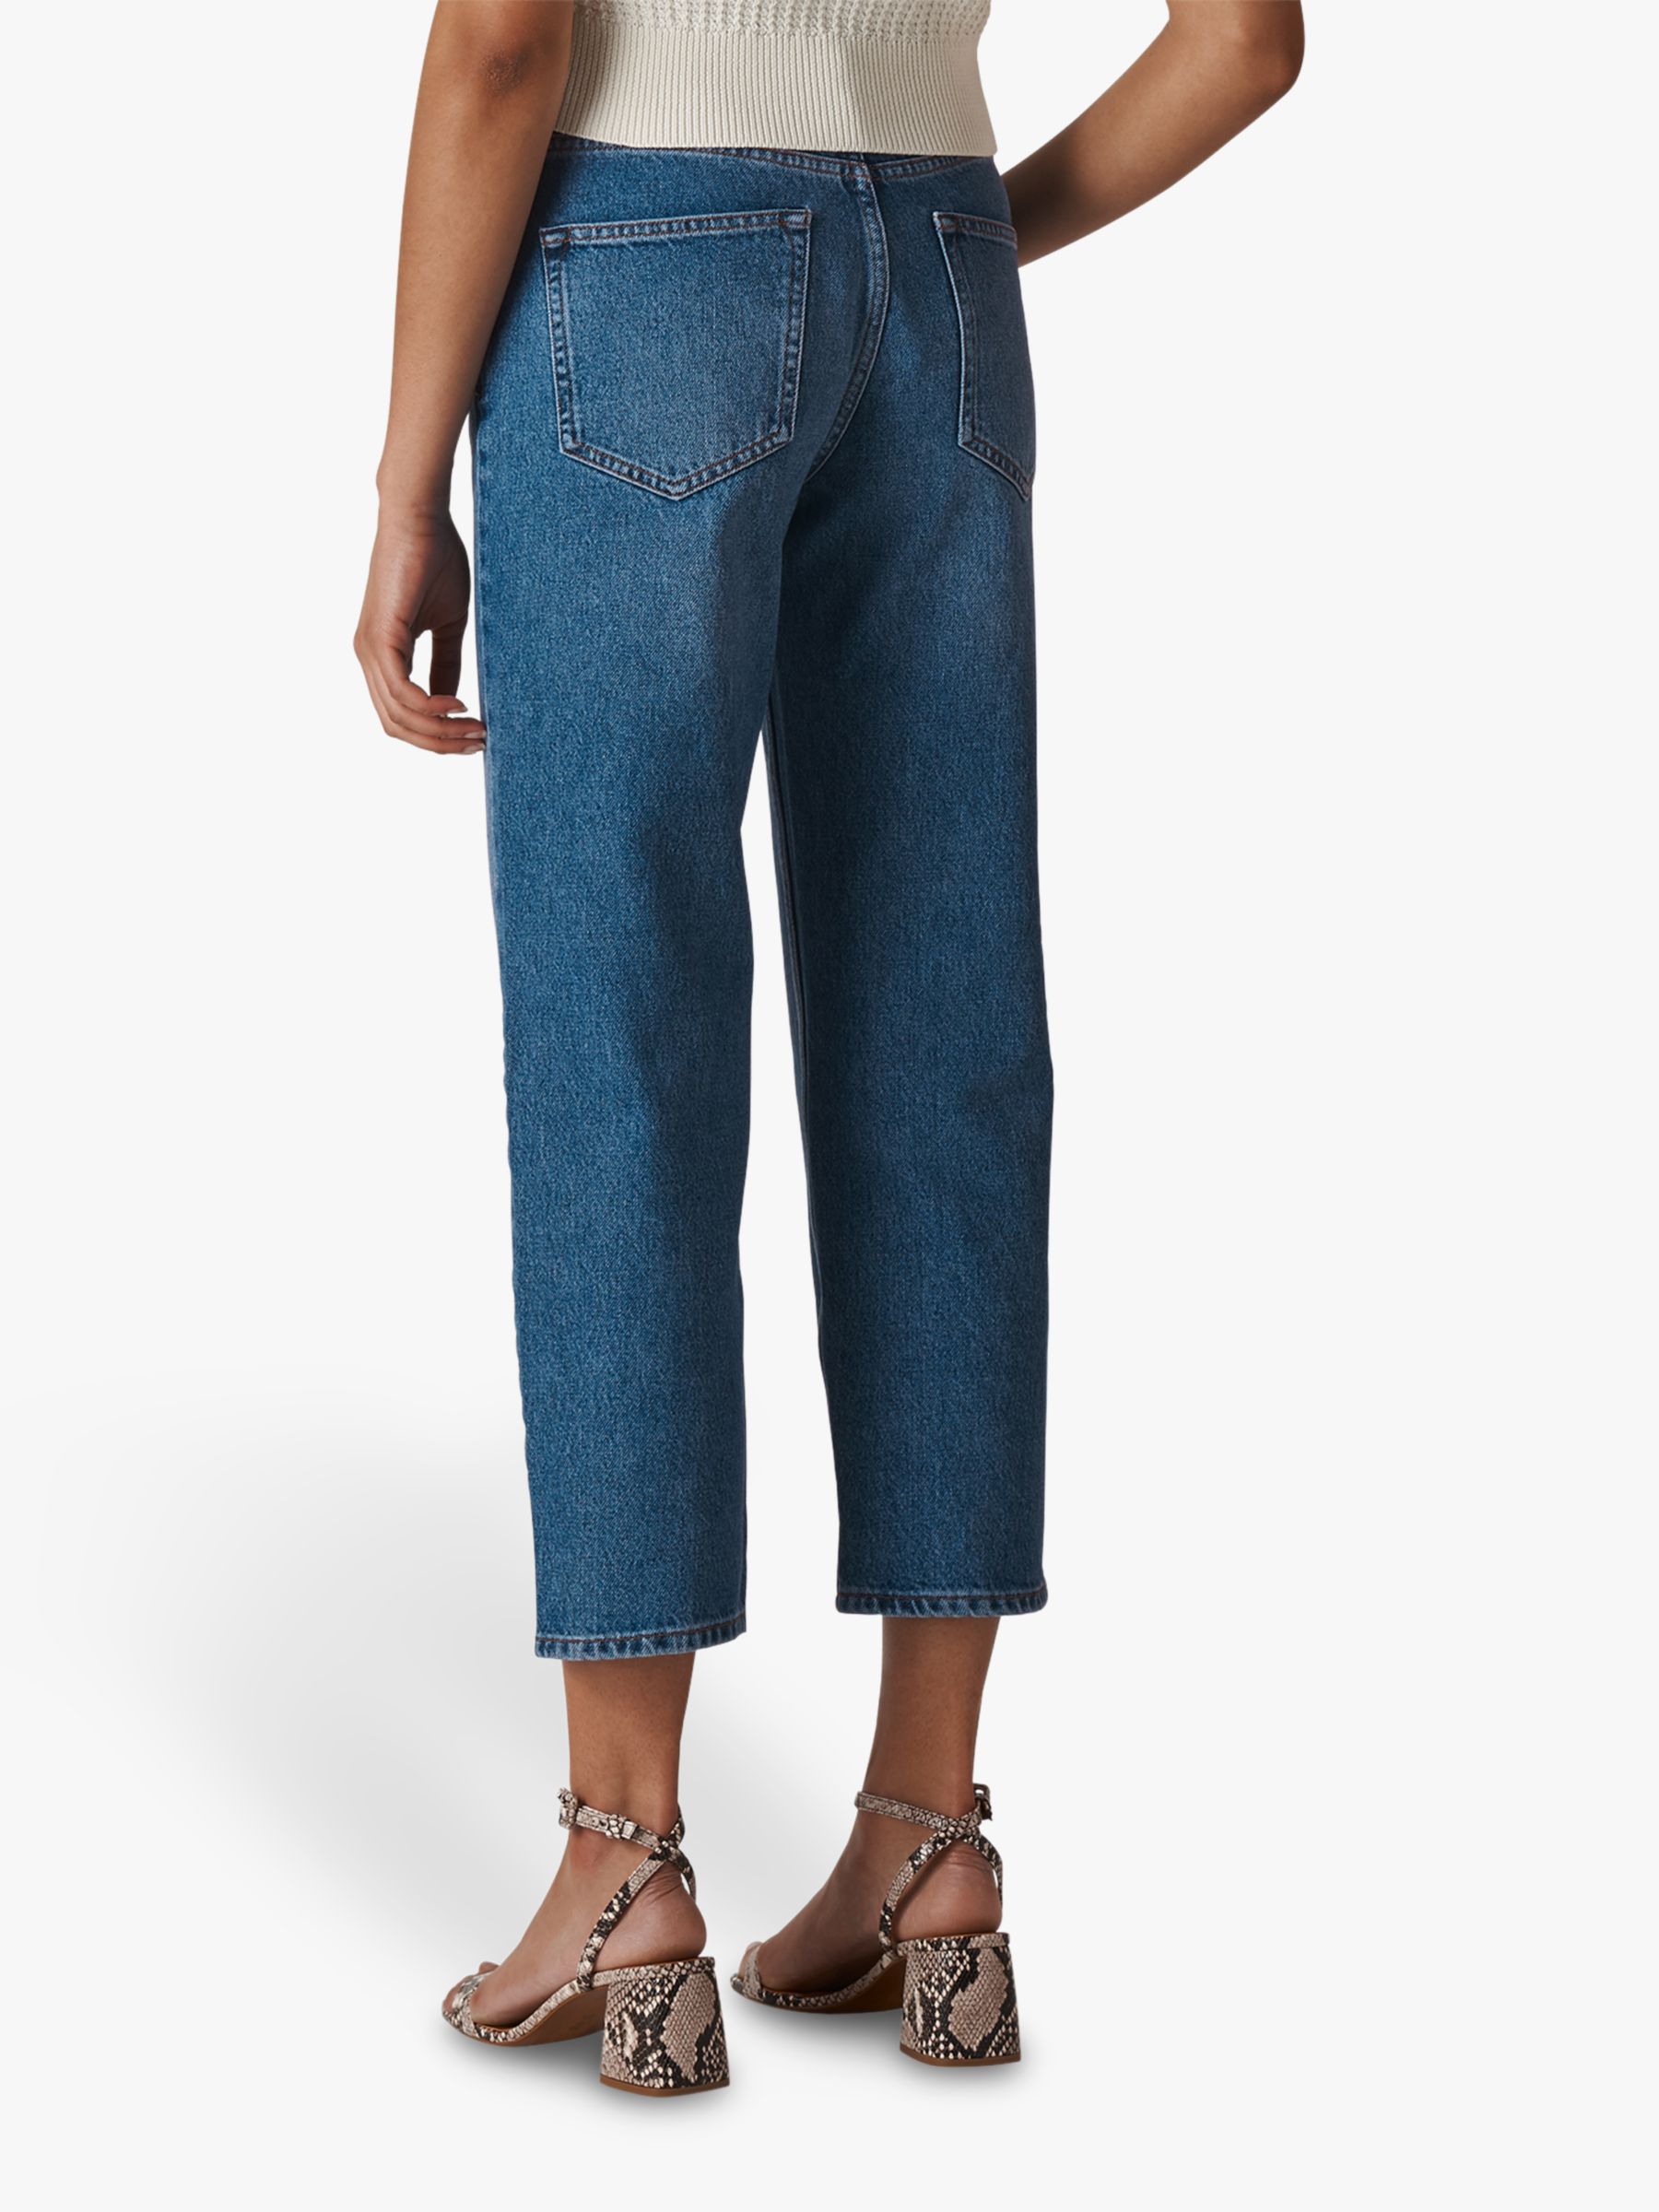 Whistles Hollie Button Front Jeans, Blue at John Lewis & Partners